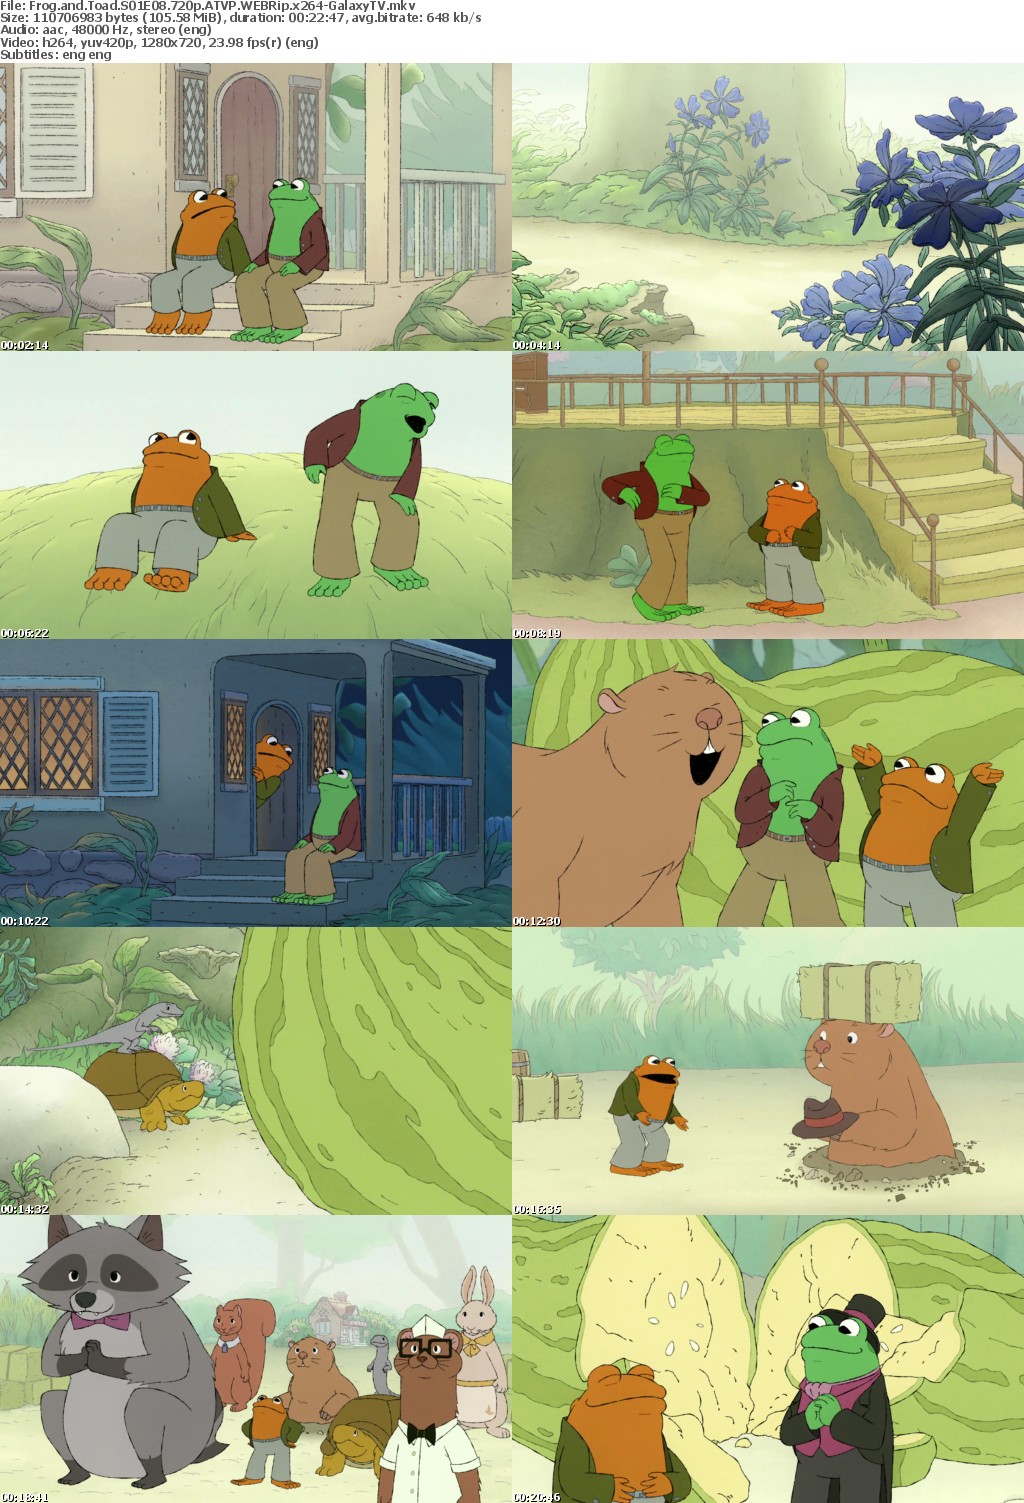 Frog and Toad S01 COMPLETE 720p ATVP WEBRip x264-GalaxyTV